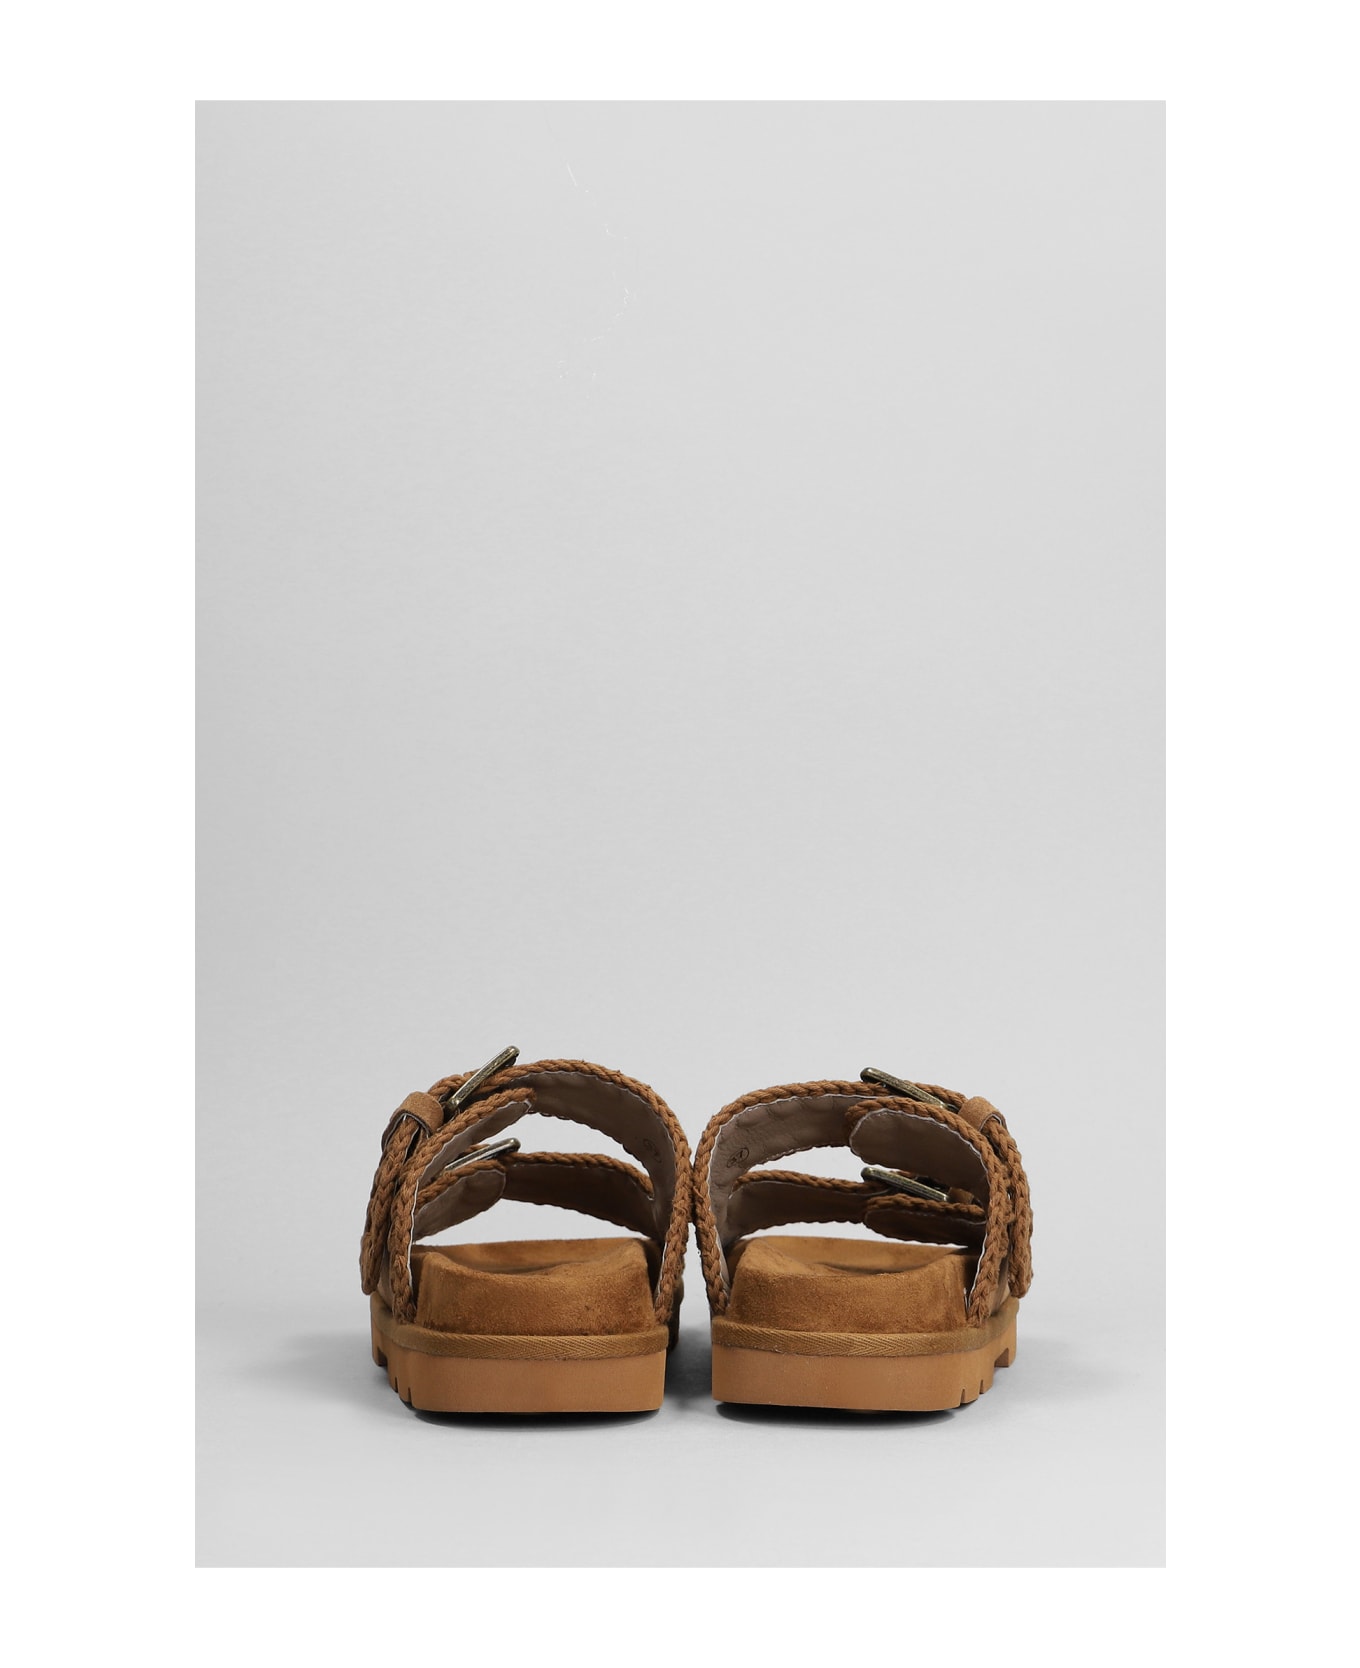 Mou Low Bio Sandal Slipper-mule In Leather Color Suede - Brown サンダル